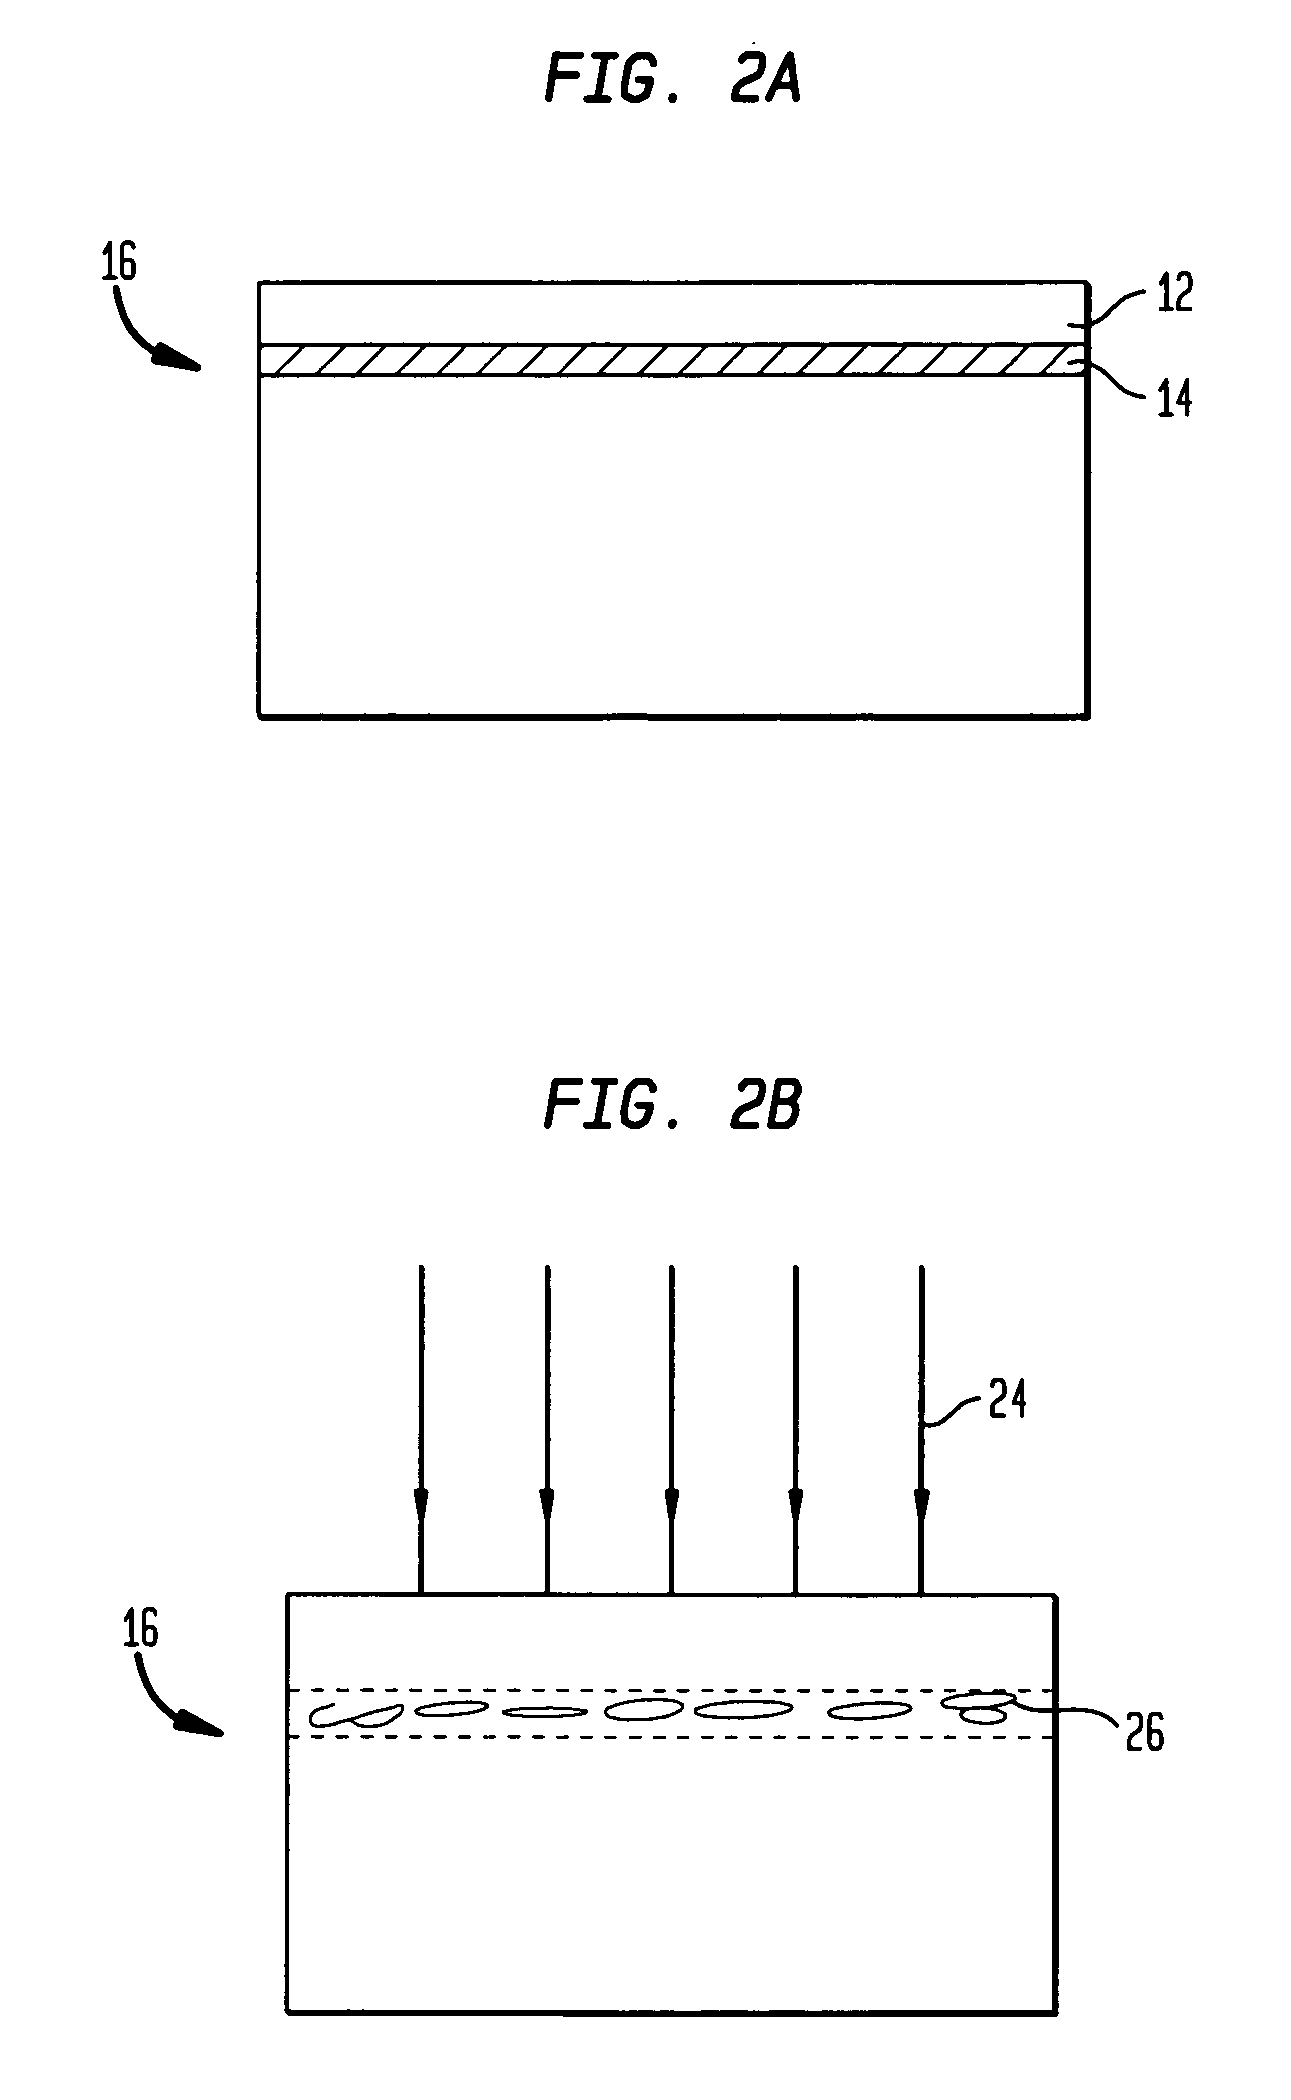 Method of producing a high resistivity SIMOX silicon substrate